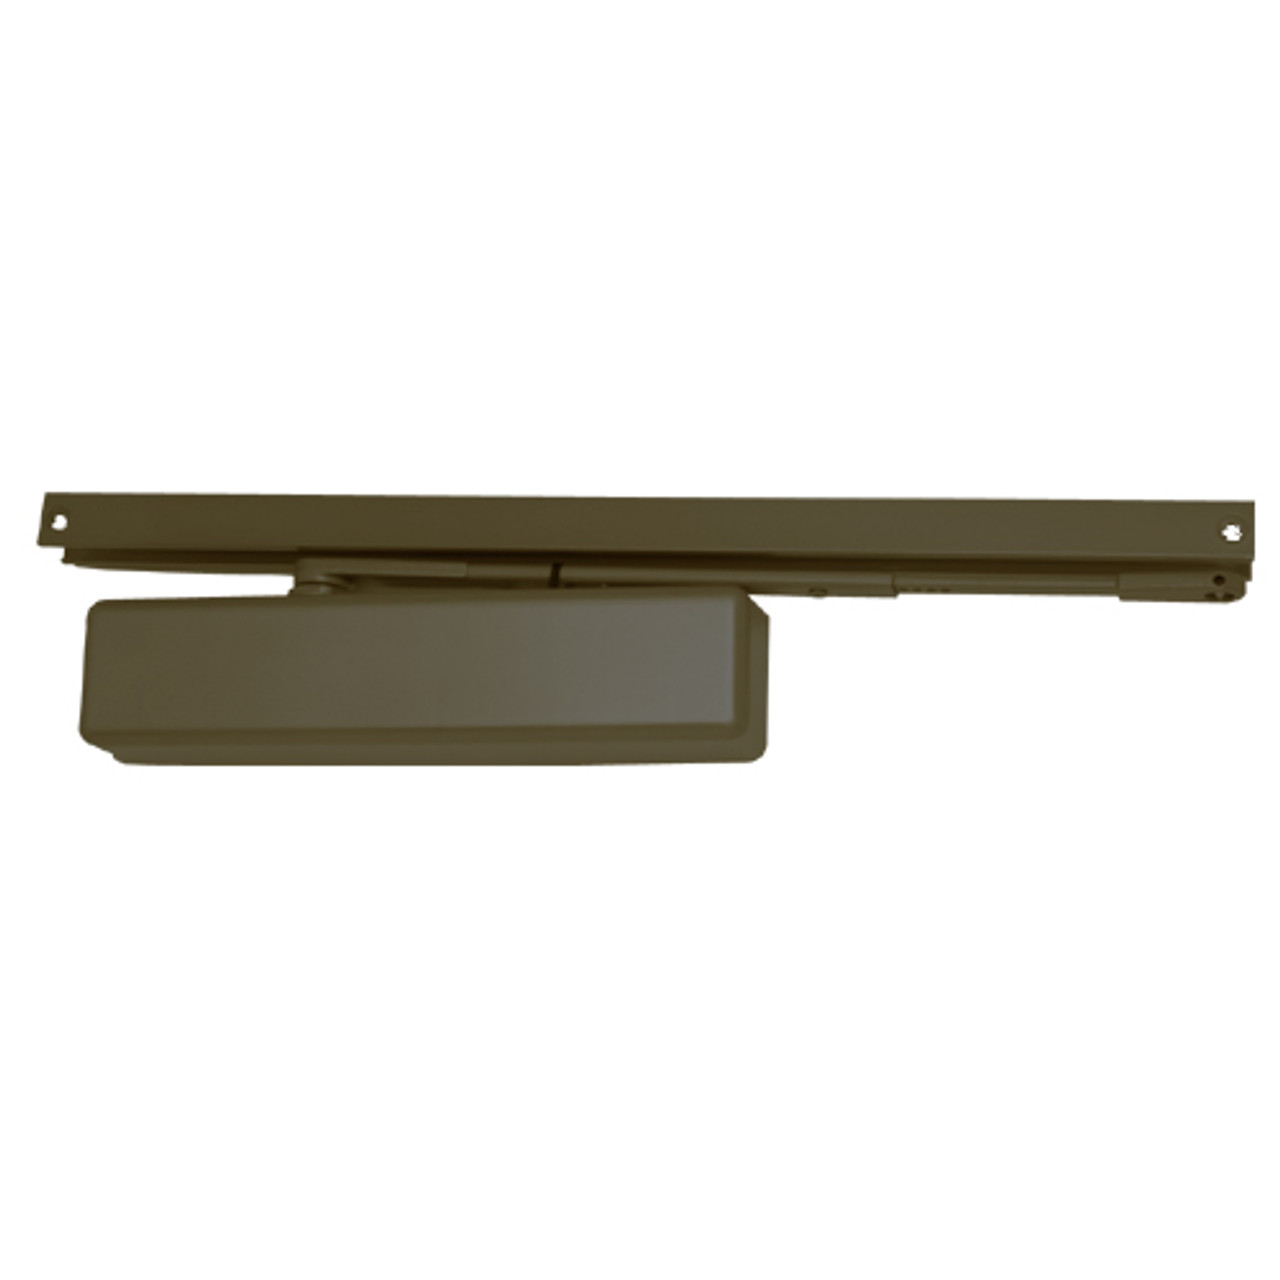 1460T-STD-US10B-DS LCN Surface Mount Door Closer with Standard Arm in Oil Rubbed Bronze Finish